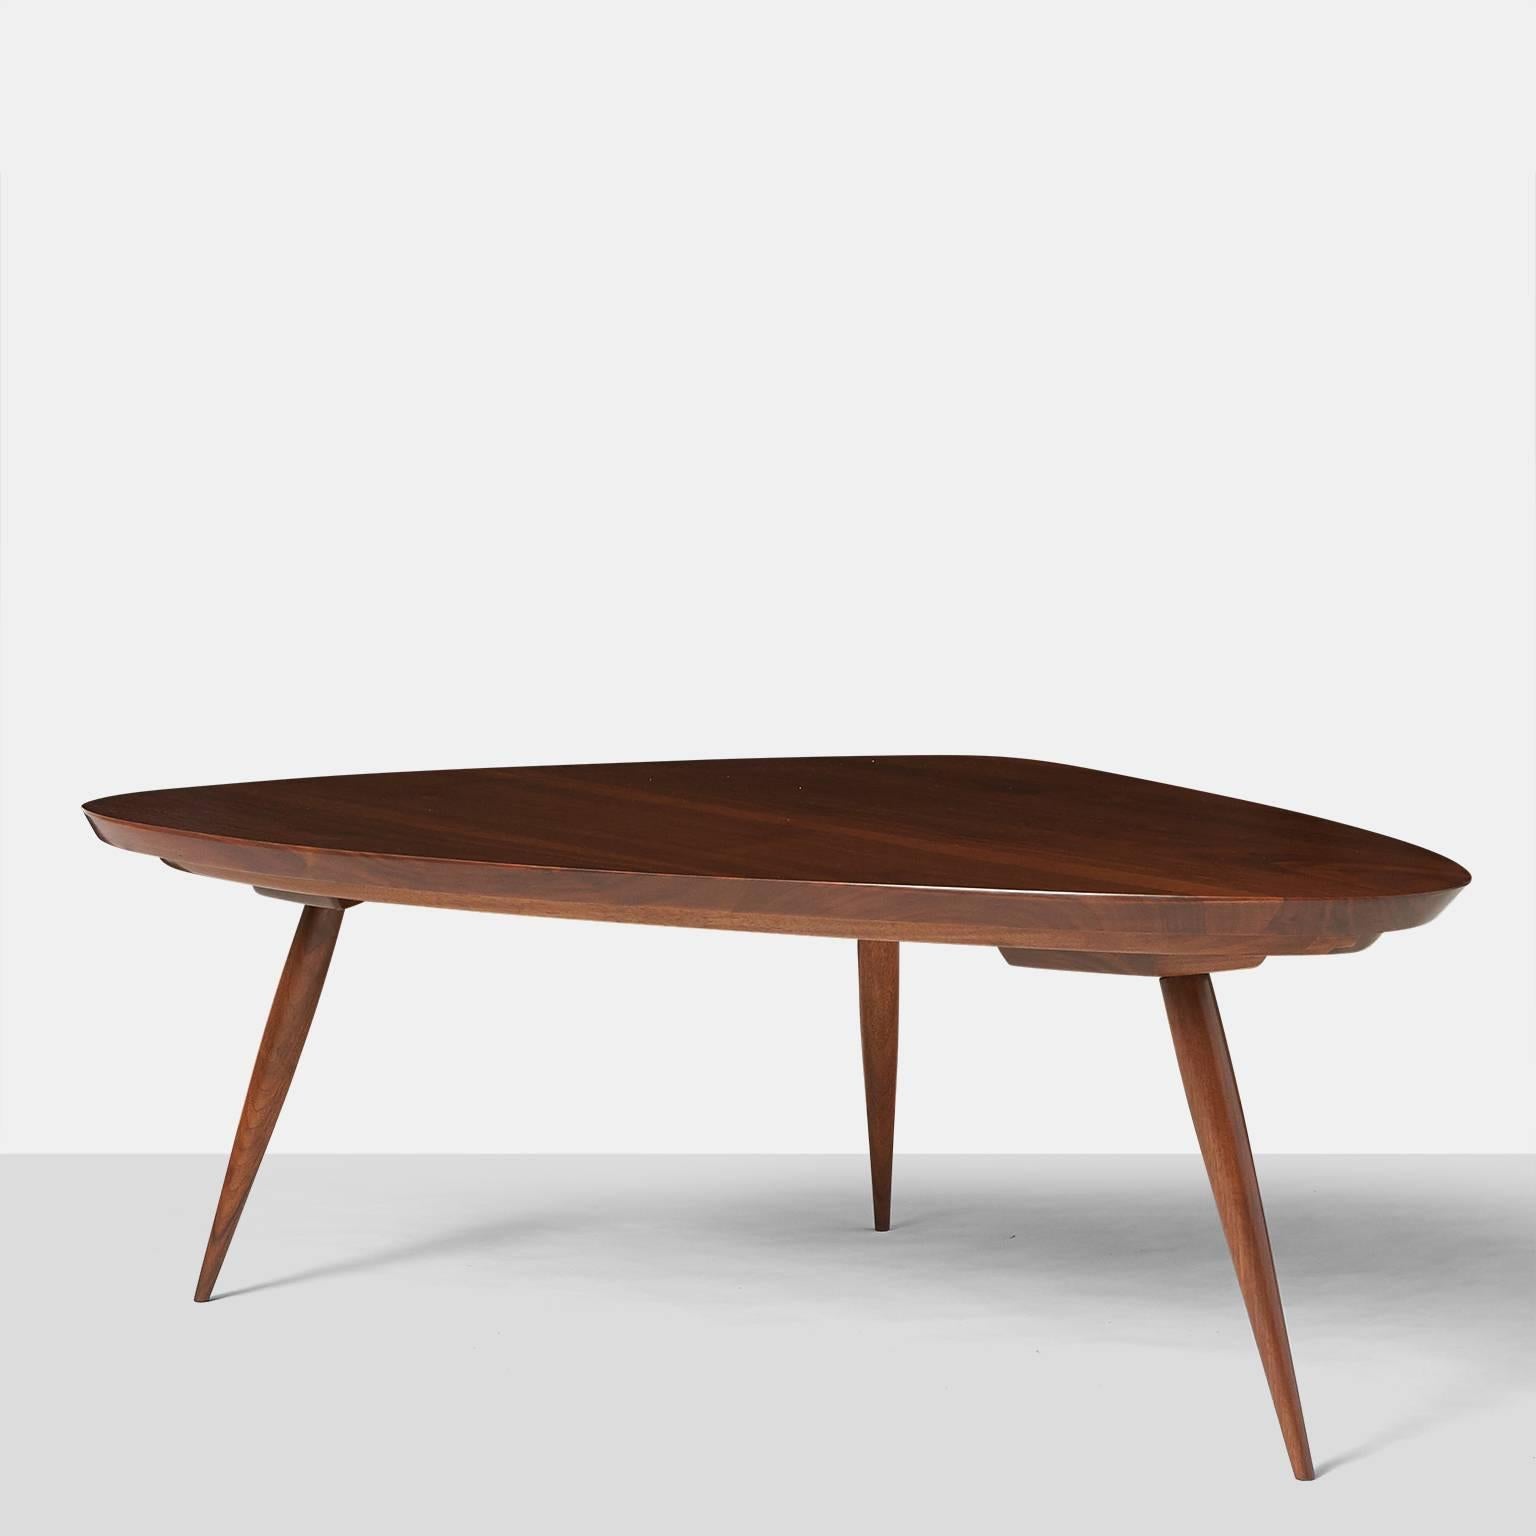 An extra large triangular shaped coffee table with rounded corners in black walnut on tapered legs. A pair of smaller version tables are available,
USA, circa 1960s.